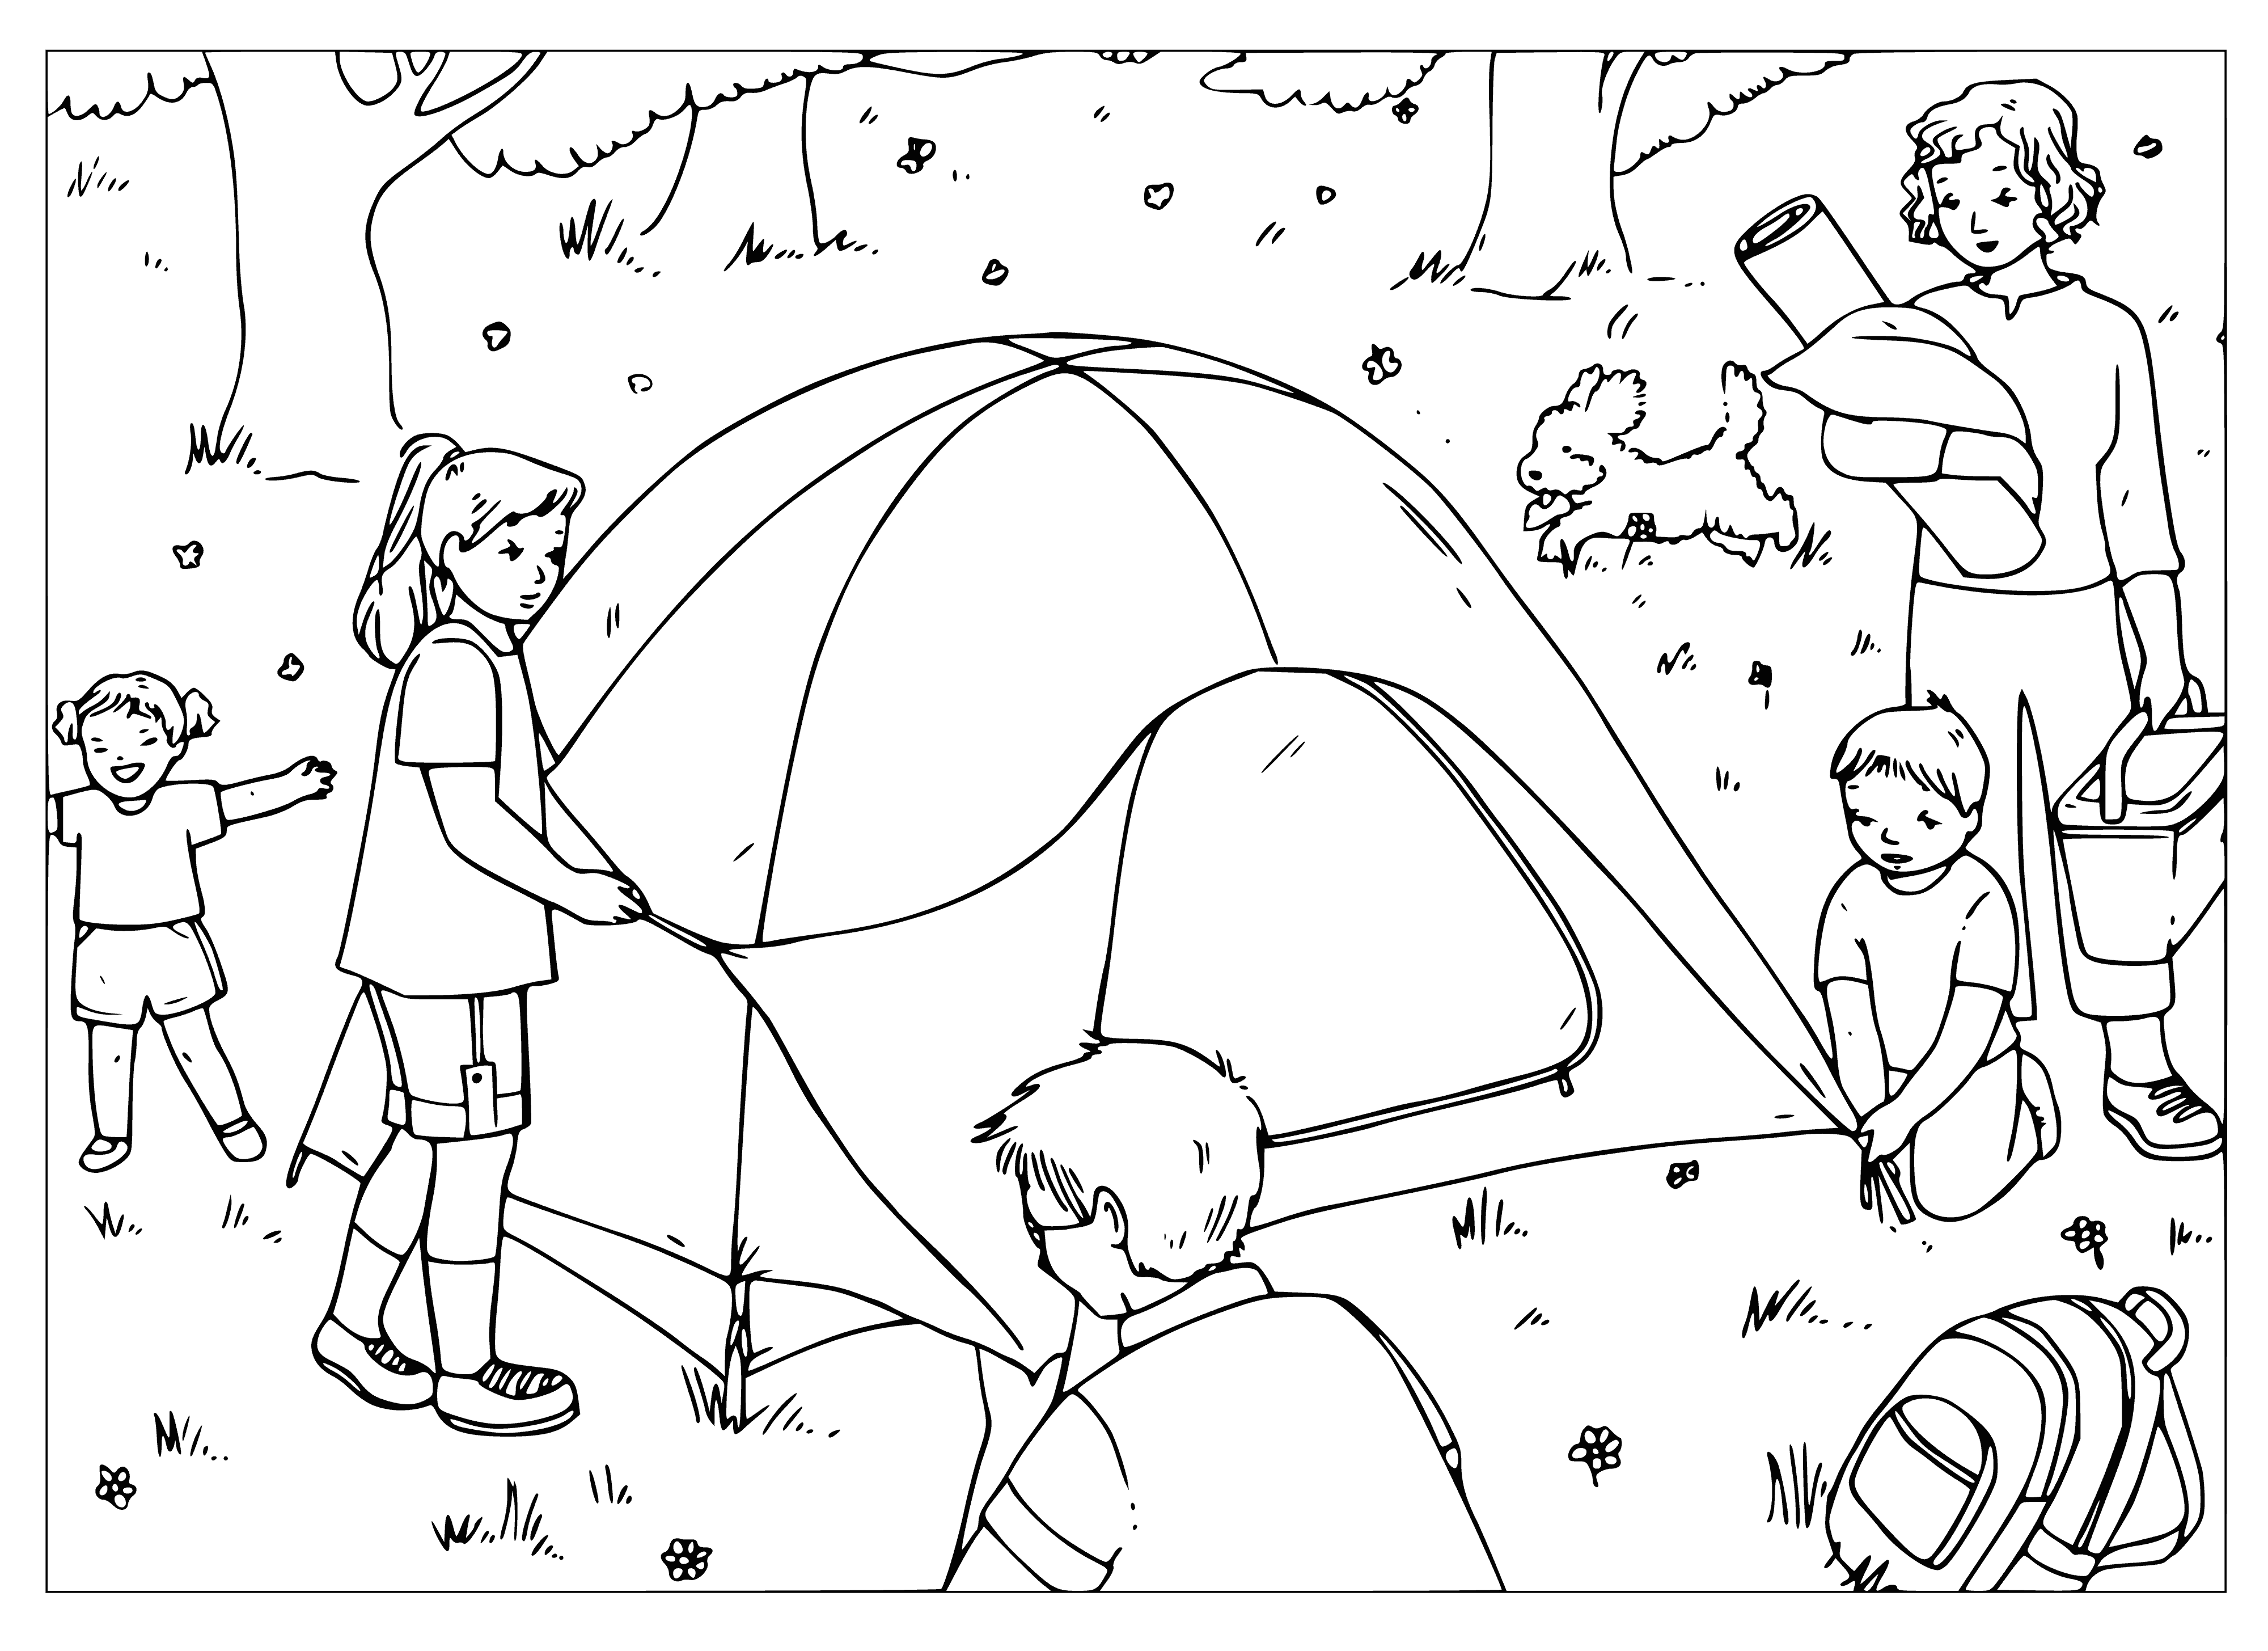 Hike coloring page